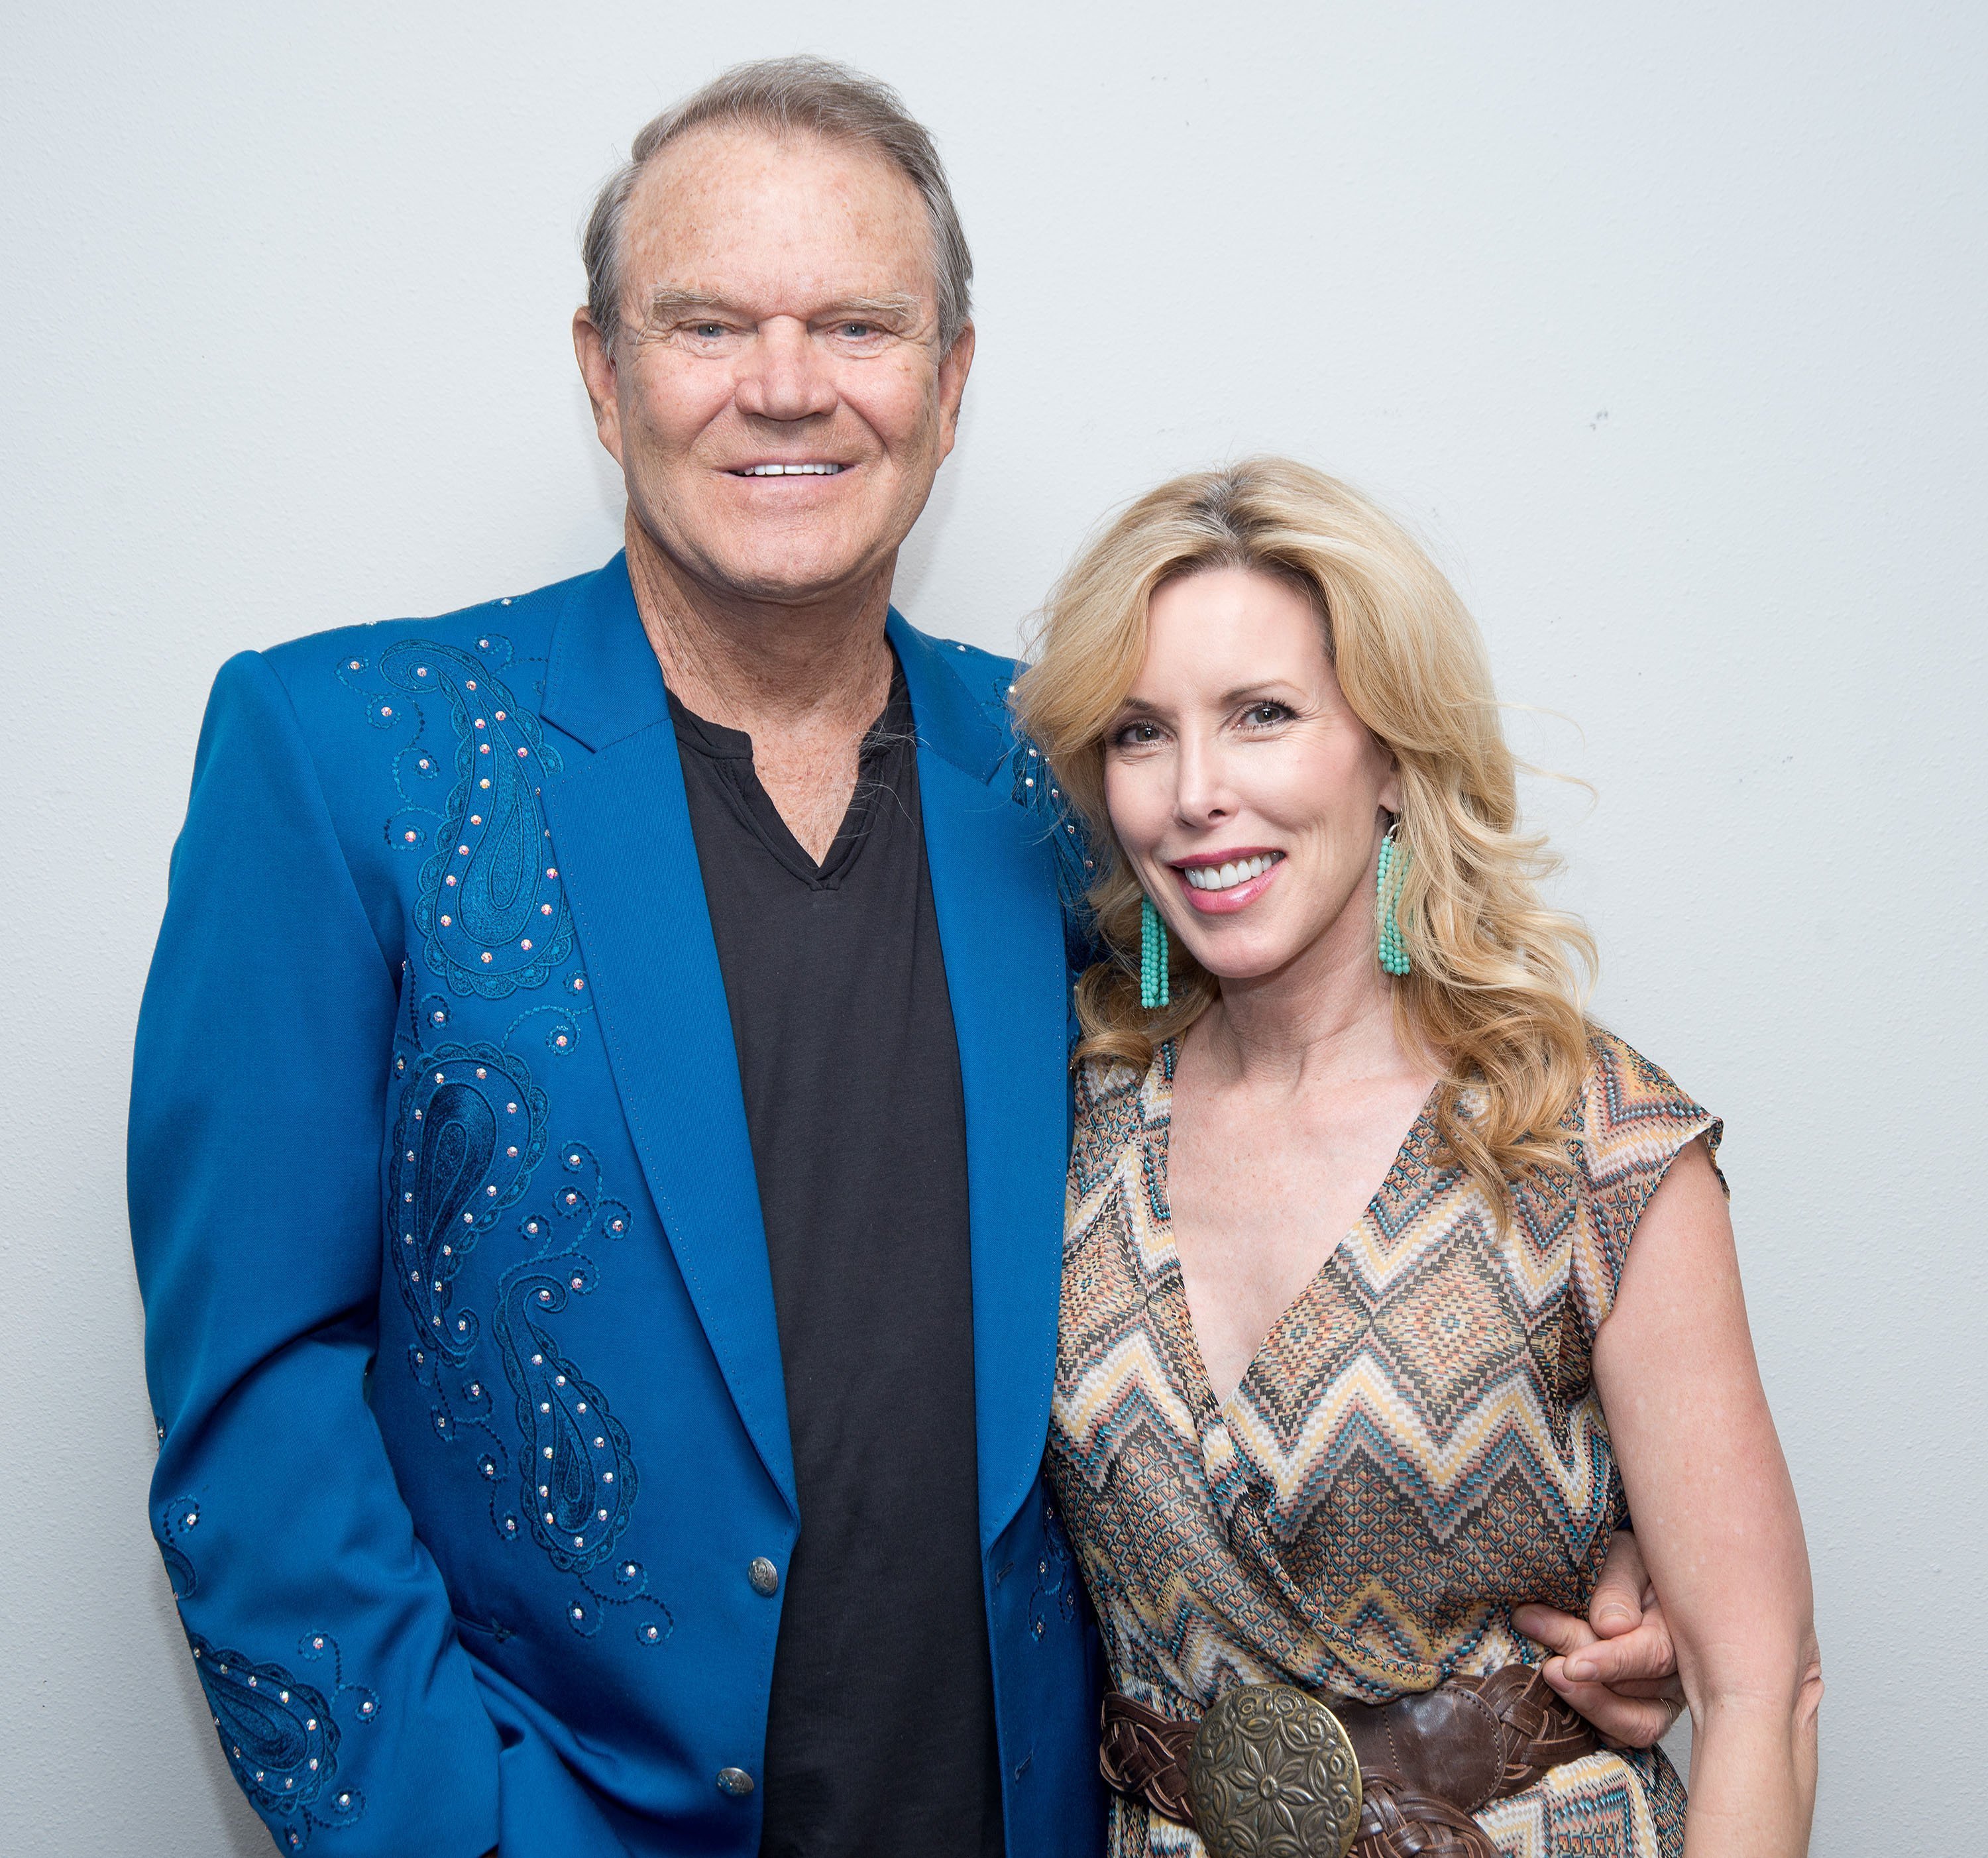 Glen Campbell and wife Kim during his Goodbye Tour performance at Route 66 Casino's Legends Theater on July 29, 2012 | Photo: Getty Images